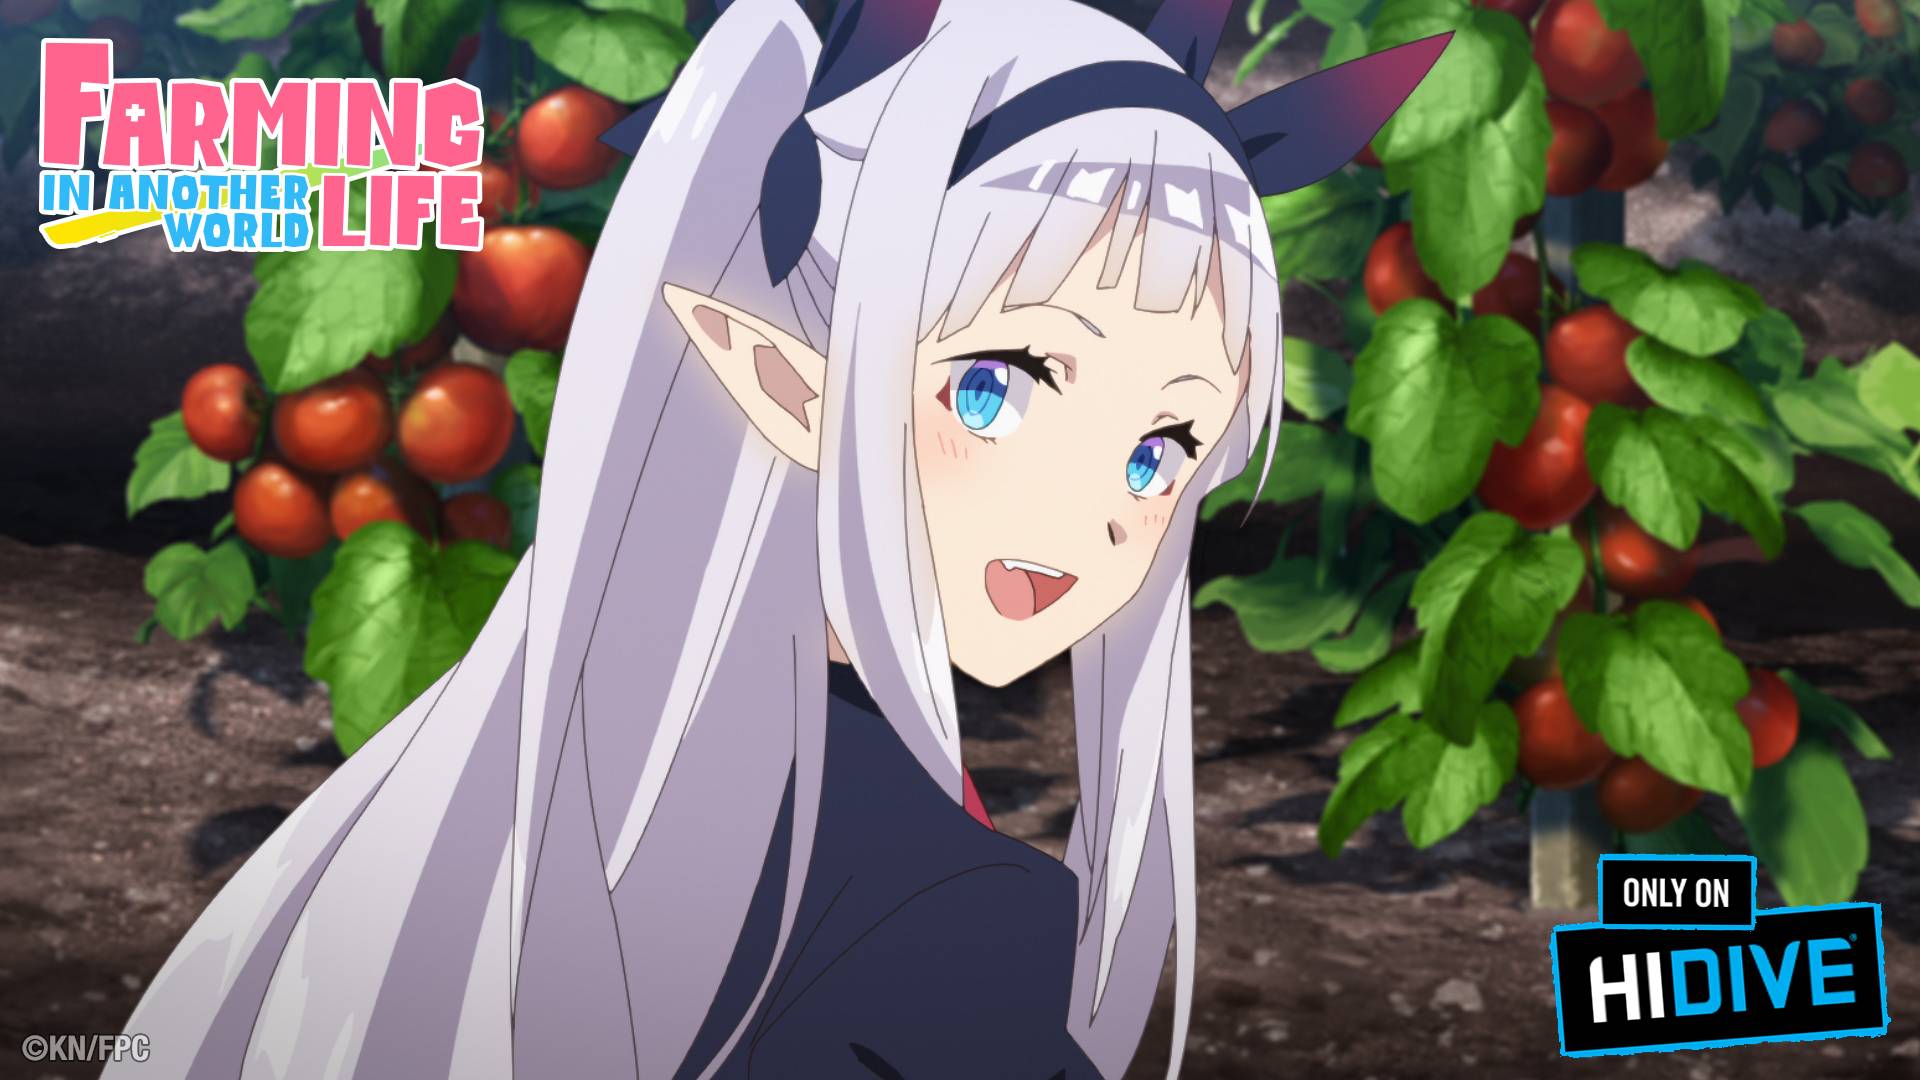 Stream Farming Life In Another World on HIDIVE